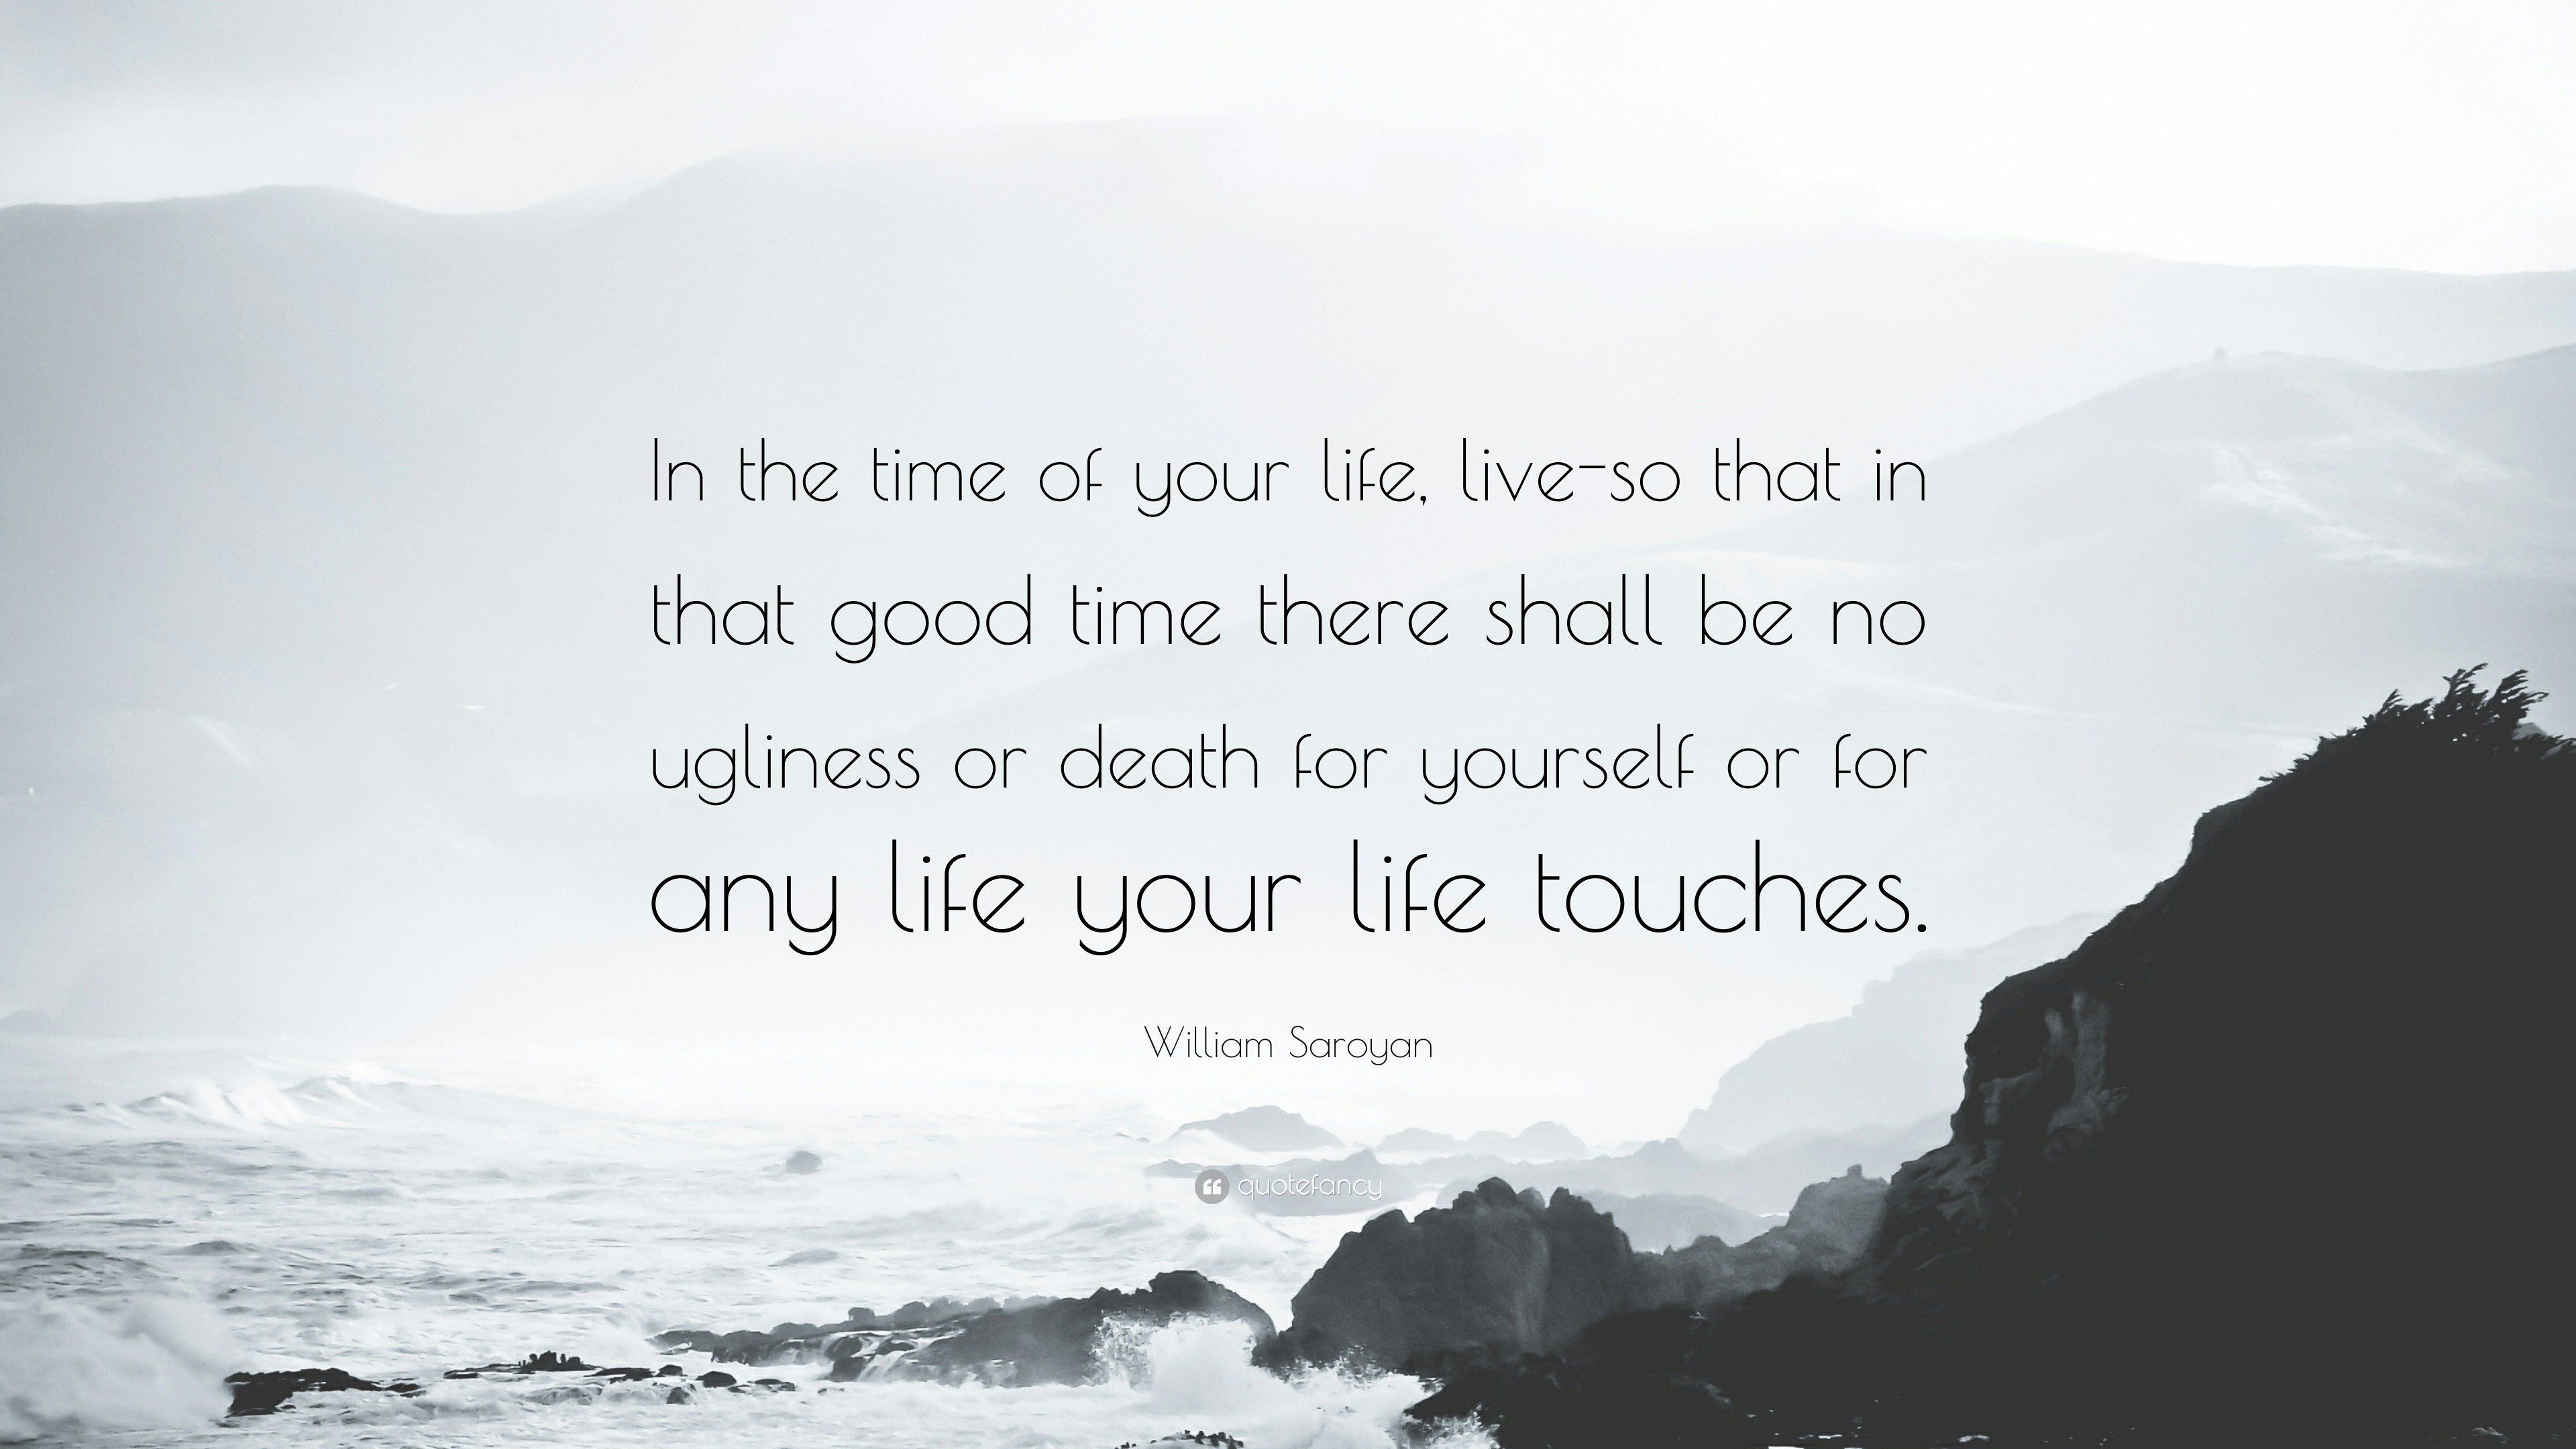 William Saroyan Quote “In the time of your life live so that